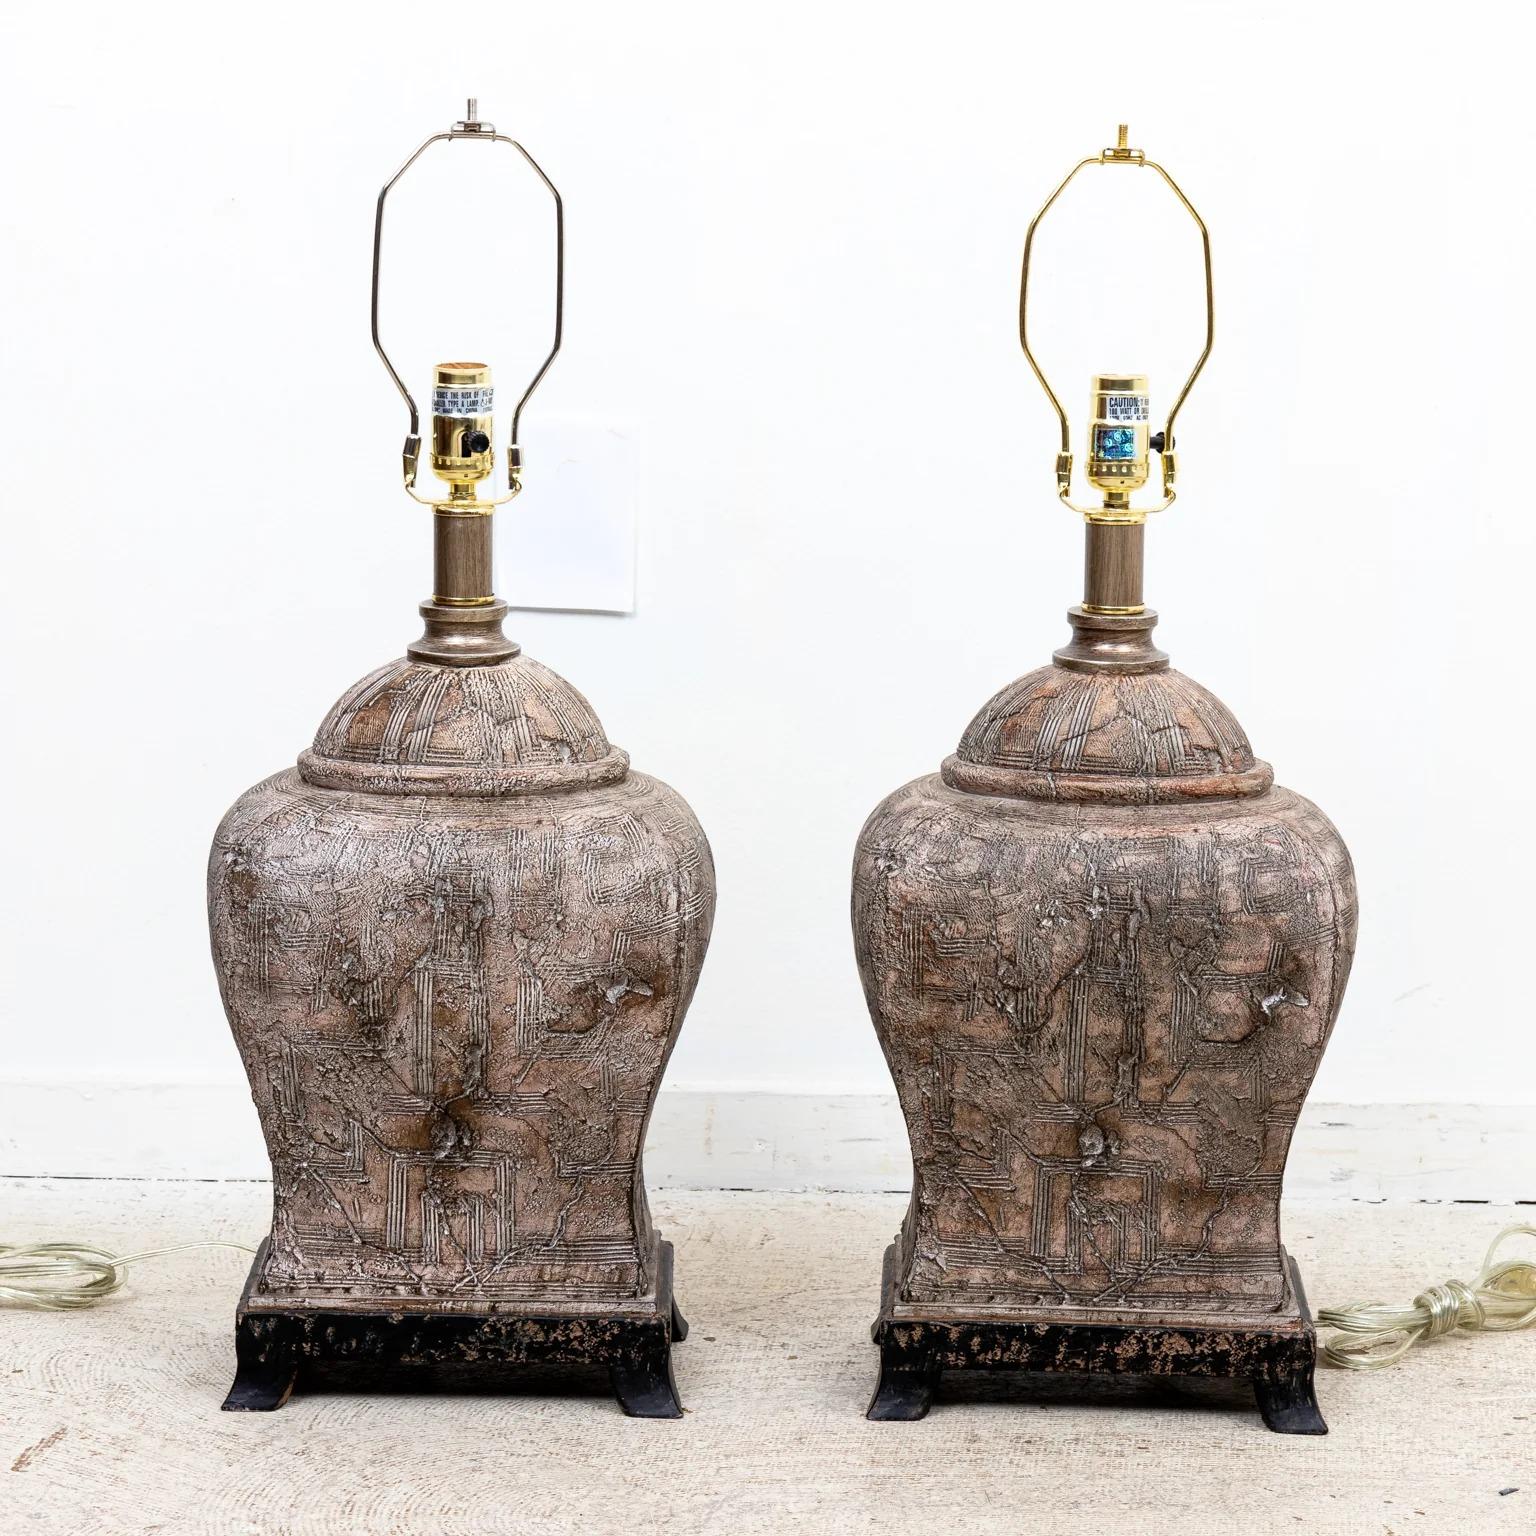 Pair of composition urn form lamps with distressed terracotta appearance, raised on black painted bases. Please note of wear consistent with age.